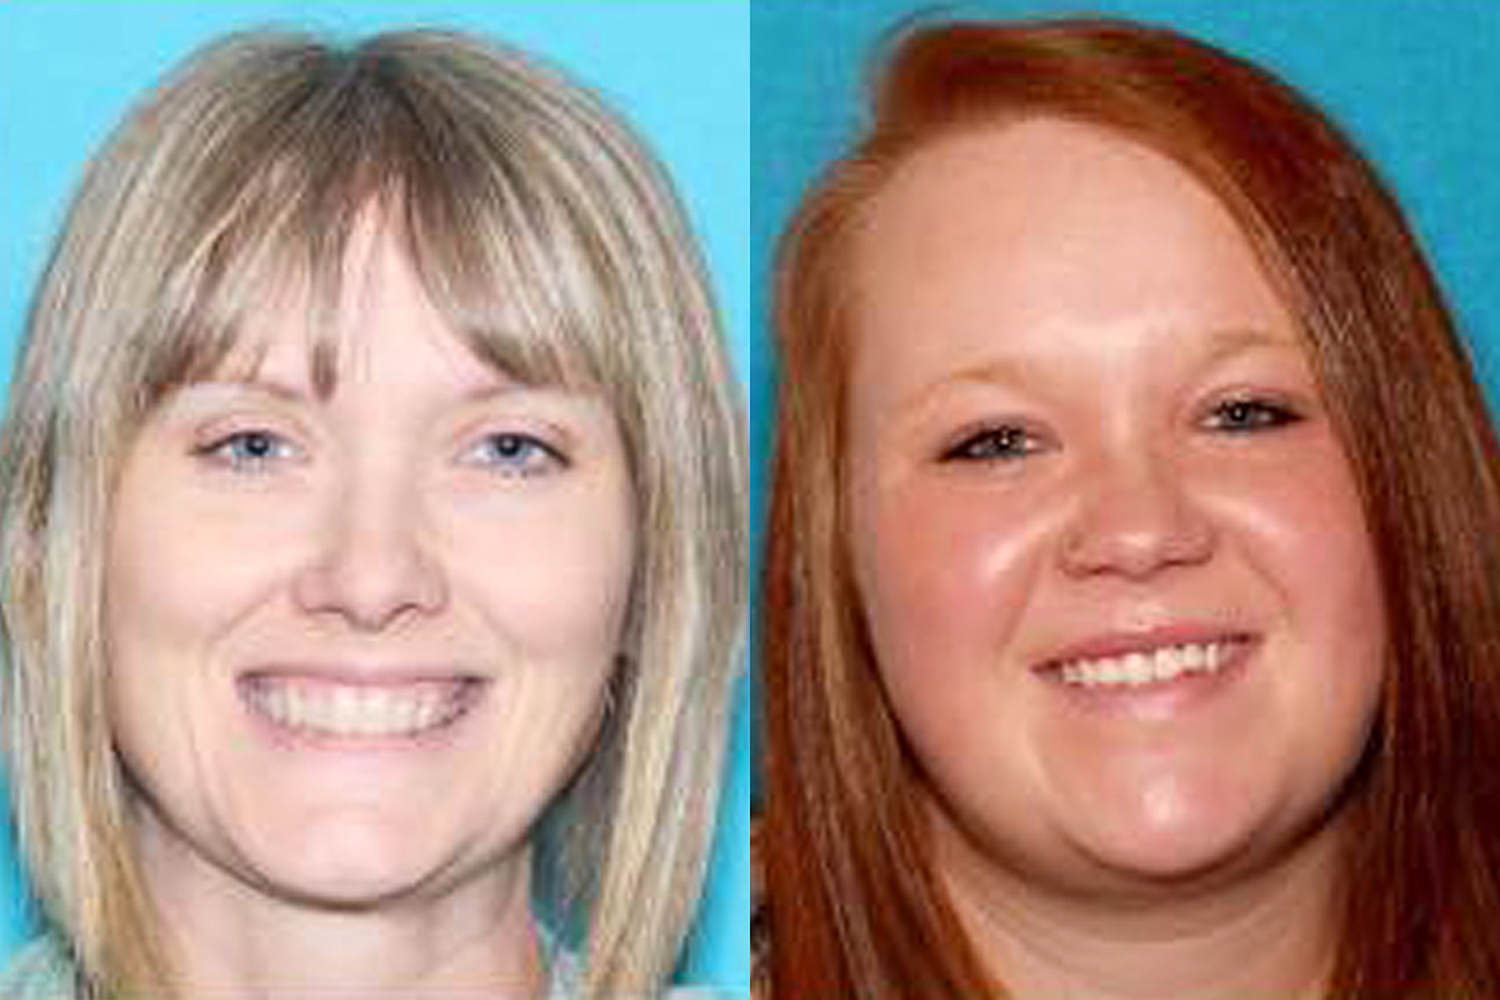 'Suspicious disappearance' of 2 women prompts an investigation in Oklahoma